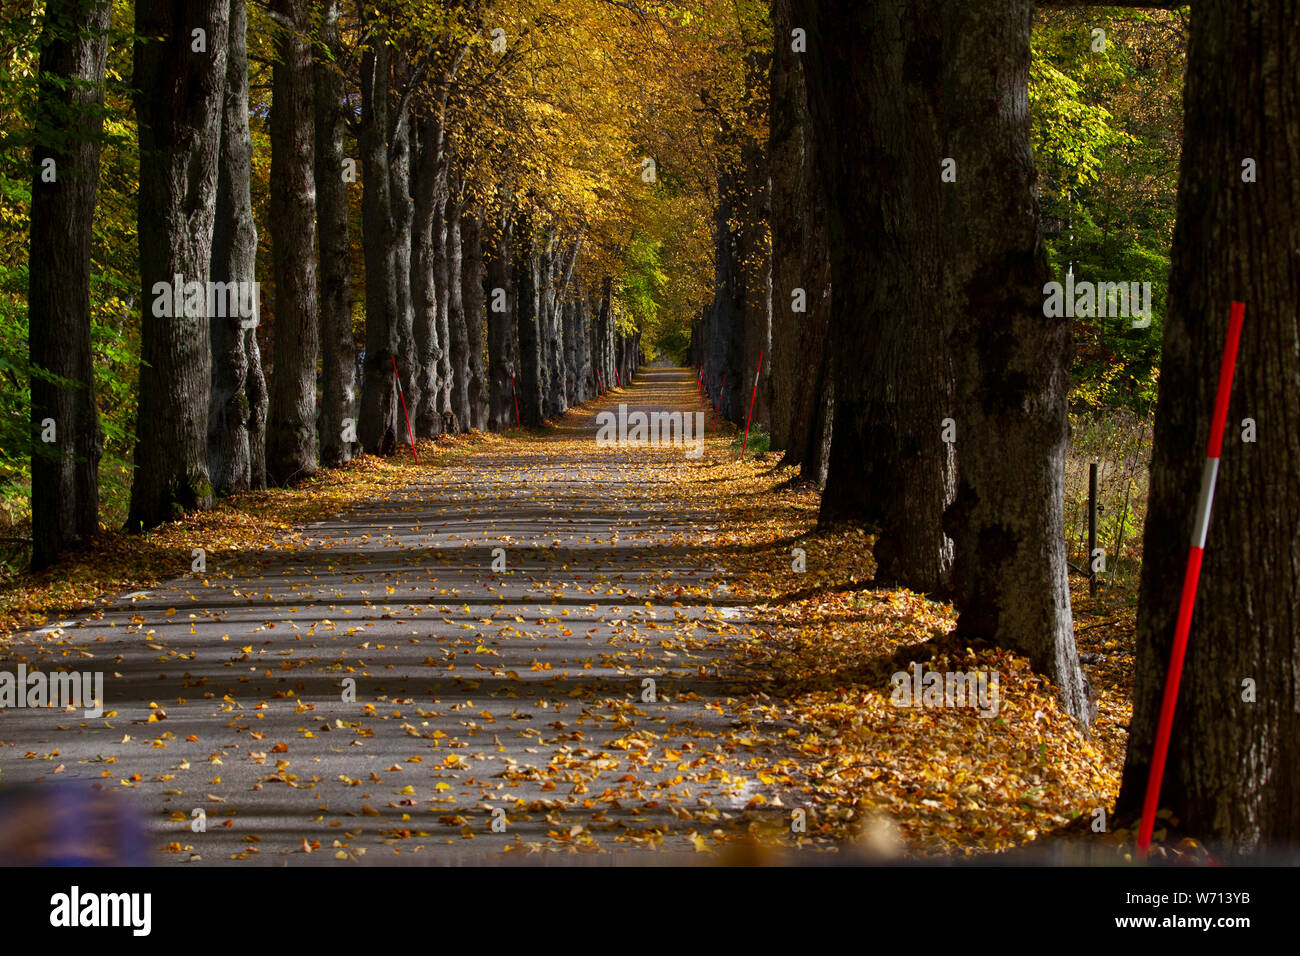 An asphalt road with beautiful autumn-colored trees Stock Photo